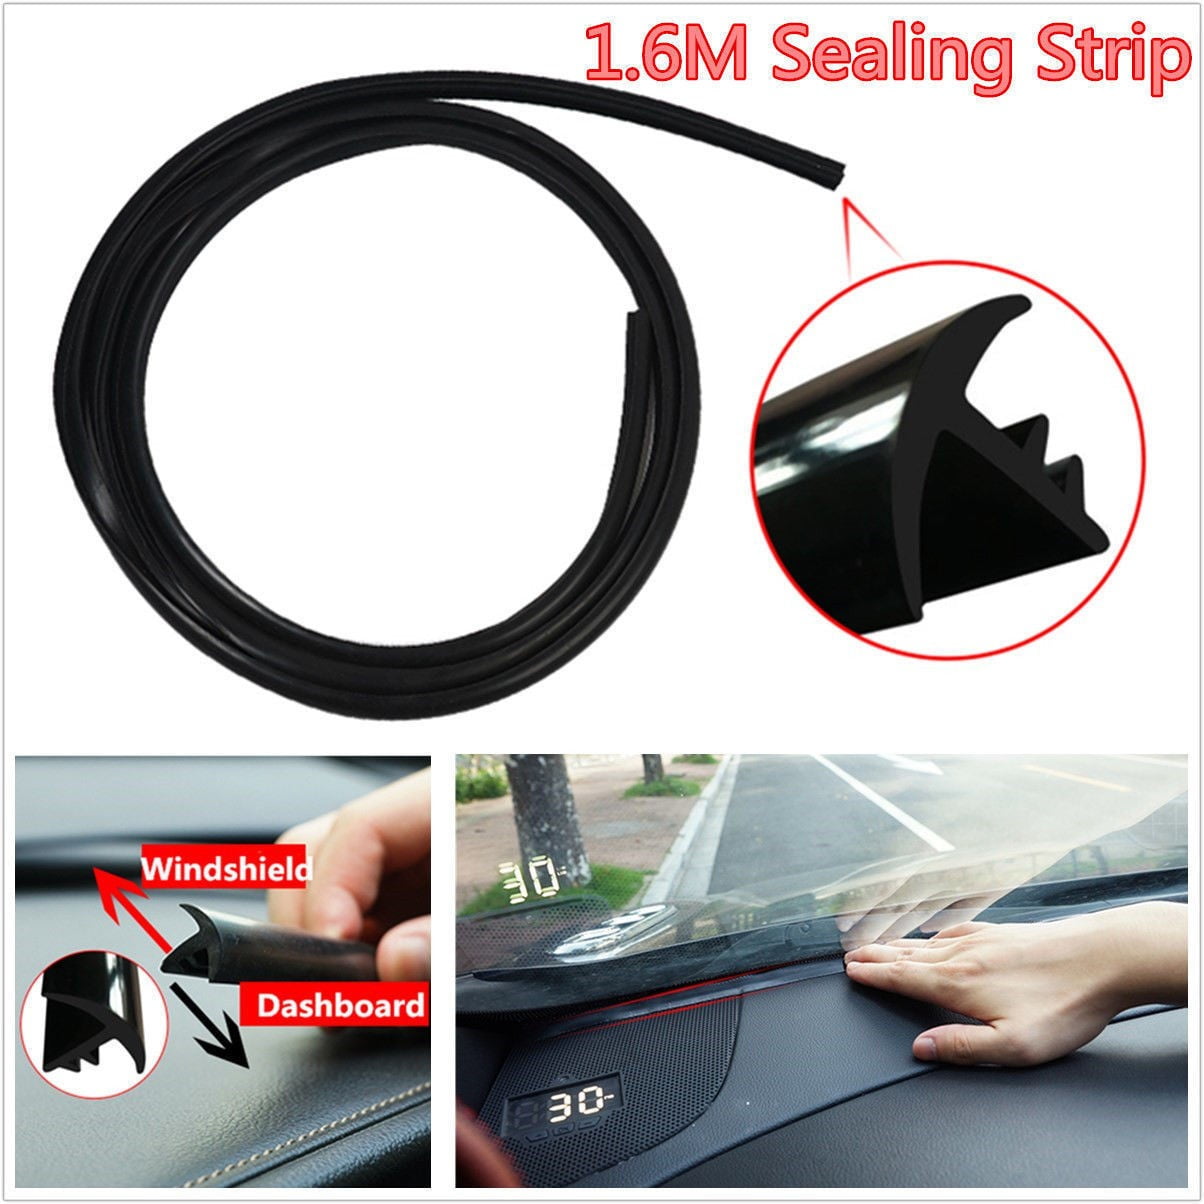 AUTOXBERT 3M/10Ft Car Door EPDM Rubber Seal Strip U Shape Automotive  Weather Striping Trim Seal with Side PVC Bulb for Cars, Boats, Trucks RV  Window